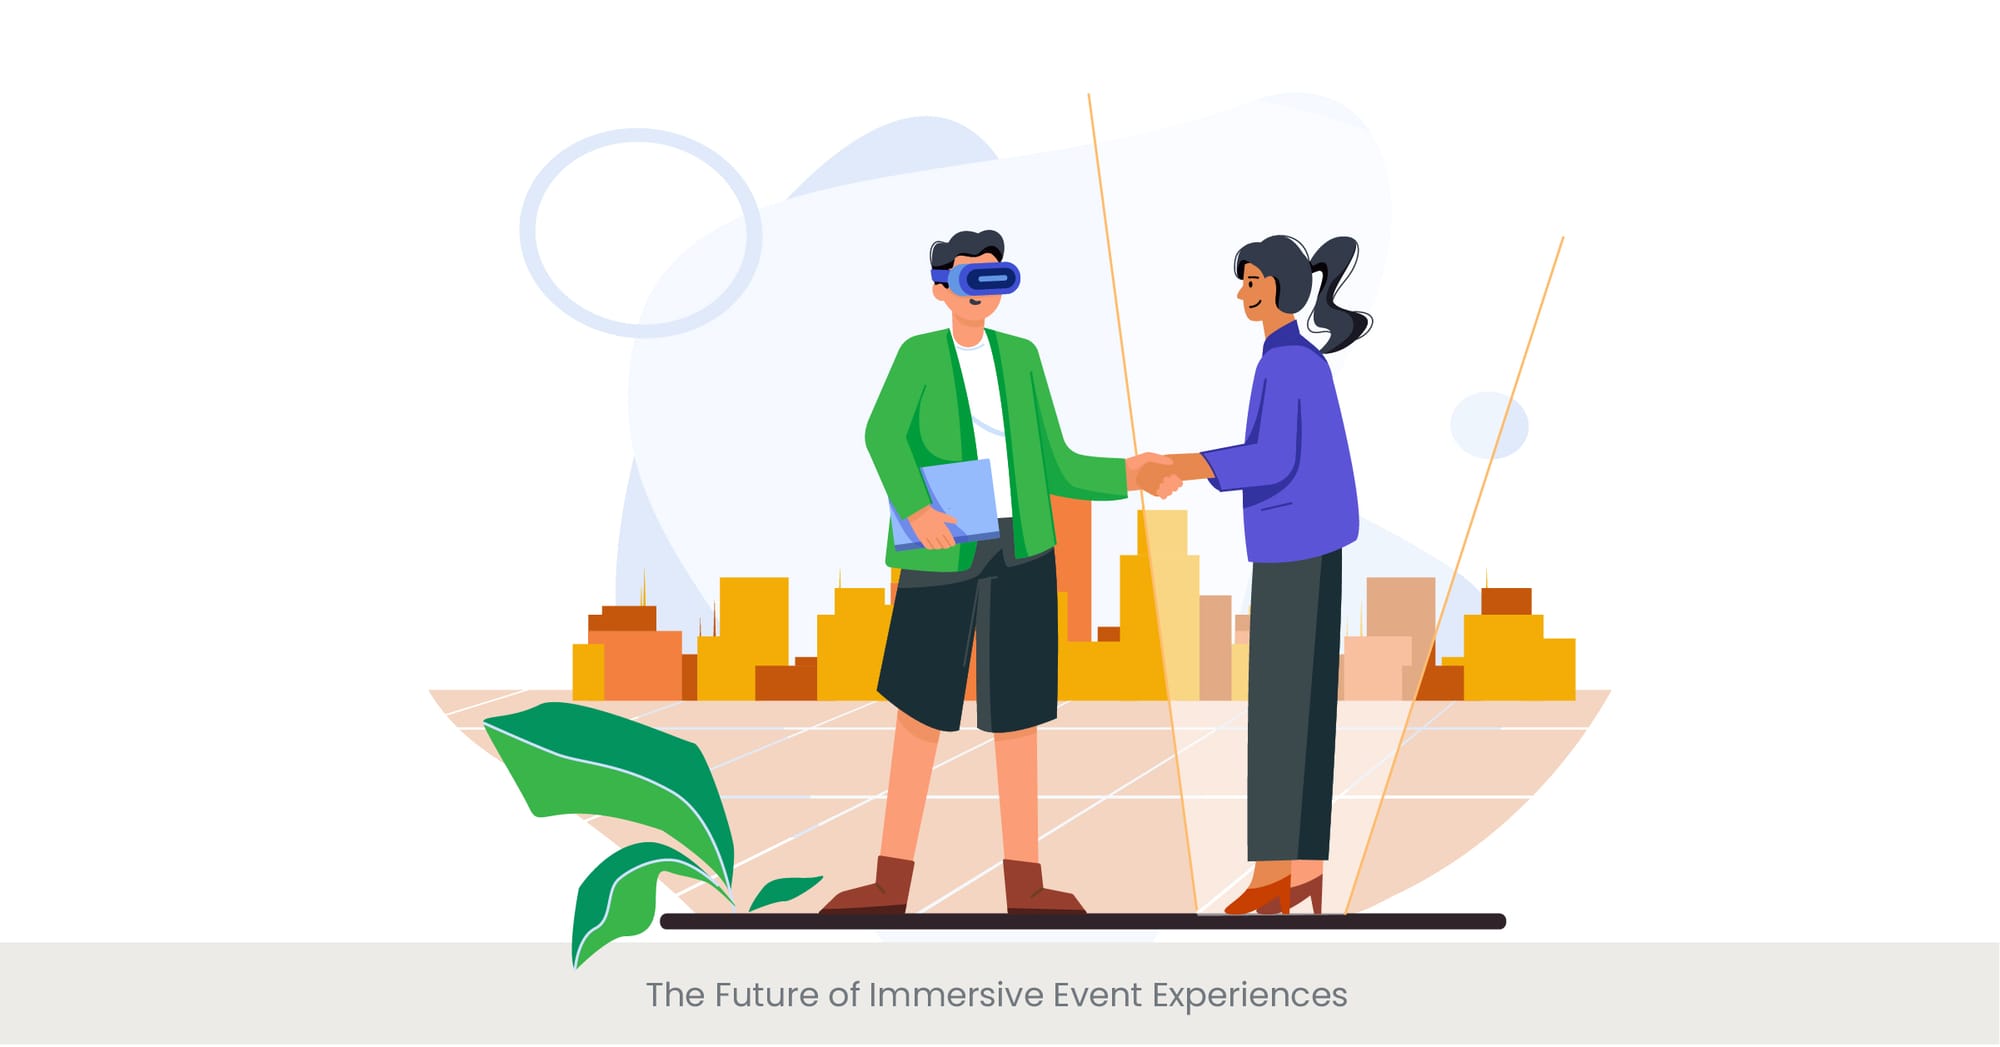 The Future of Immersive Event Experiences